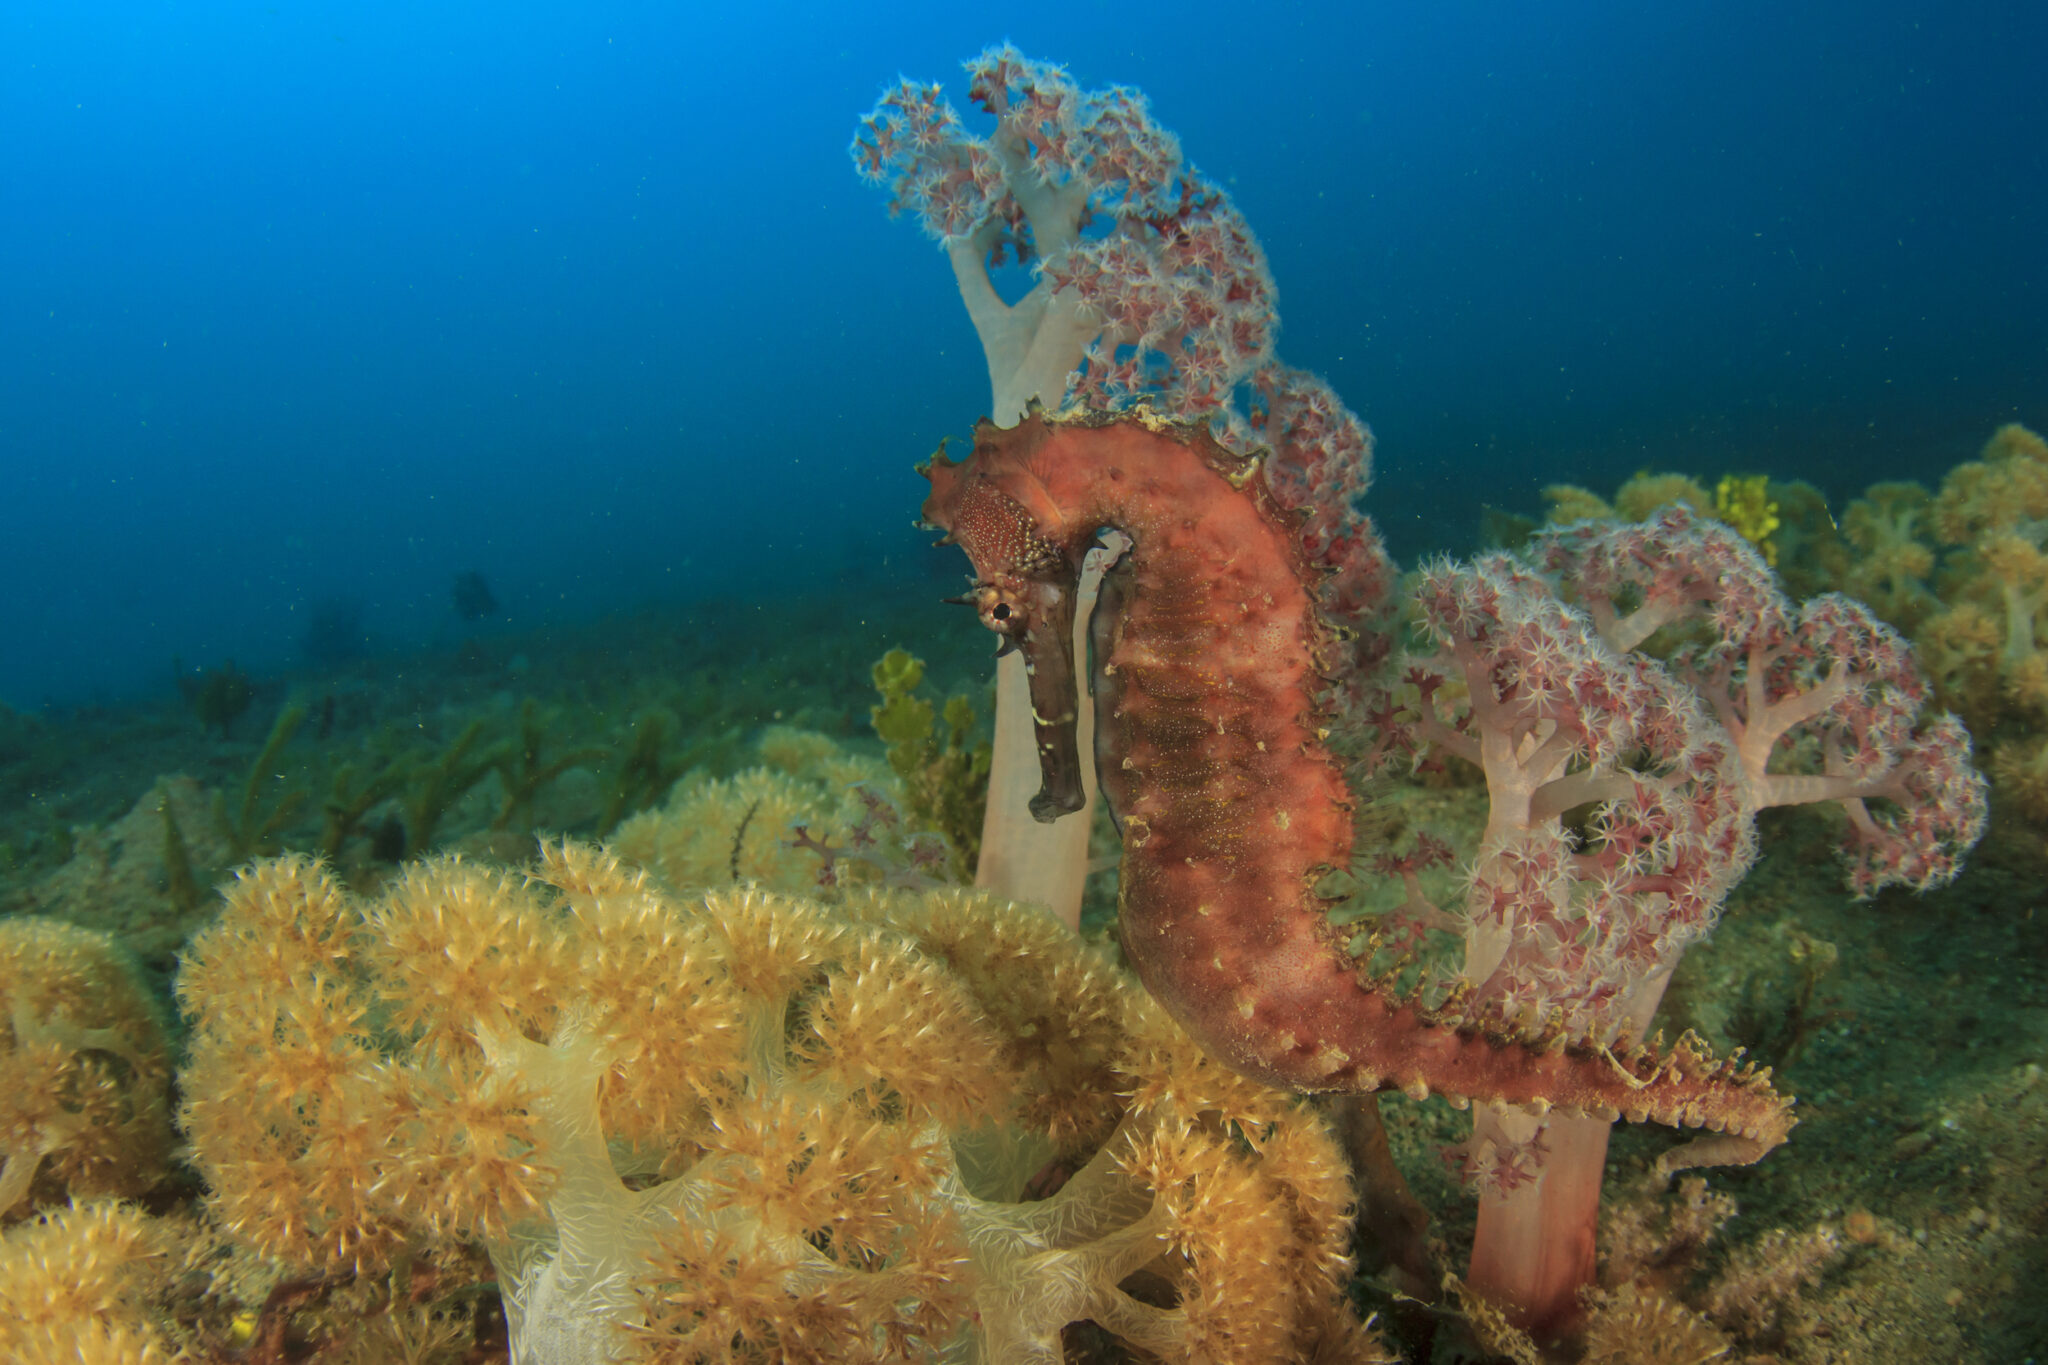 For Seahorses, Males Get Pregnant and Give Birth